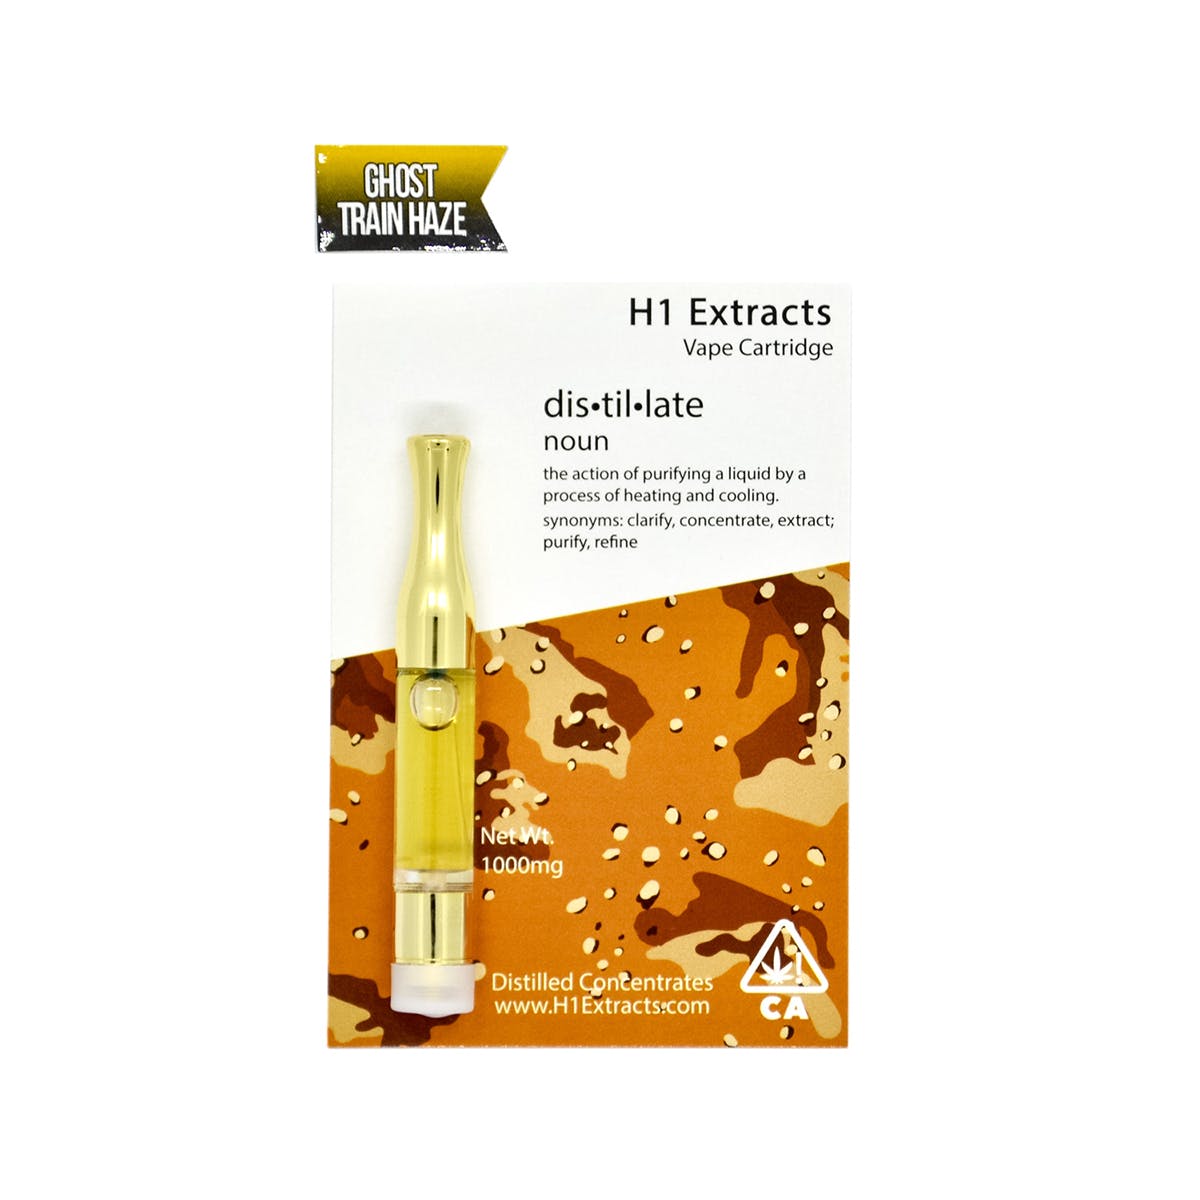 concentrate-h1-extracts-classic-ghost-train-haze-cartridge